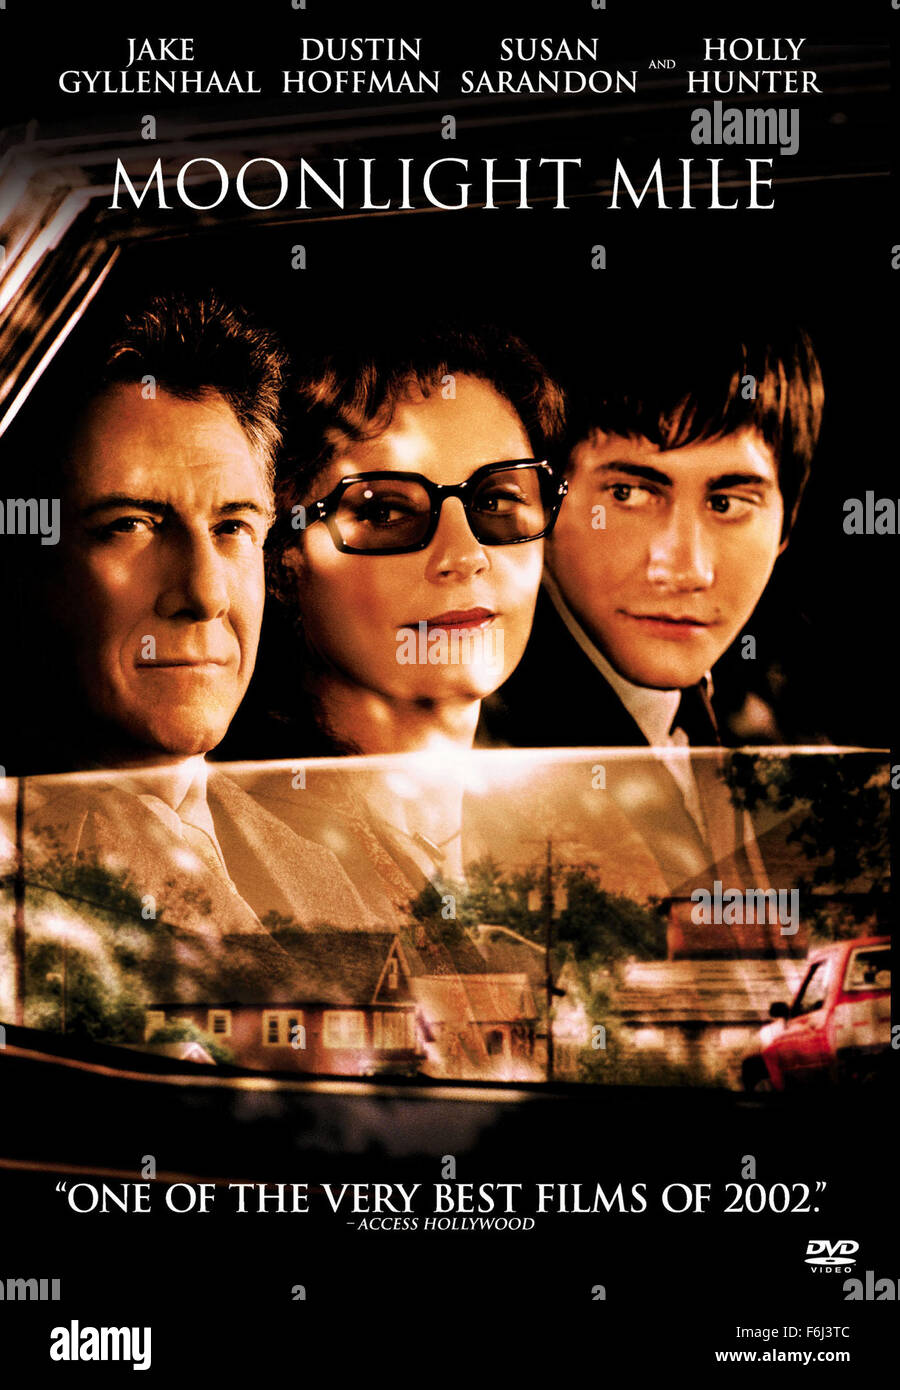 RELEASE DATE: October 4, 2002 MOVIE TITLE: Moonlight Mile ...